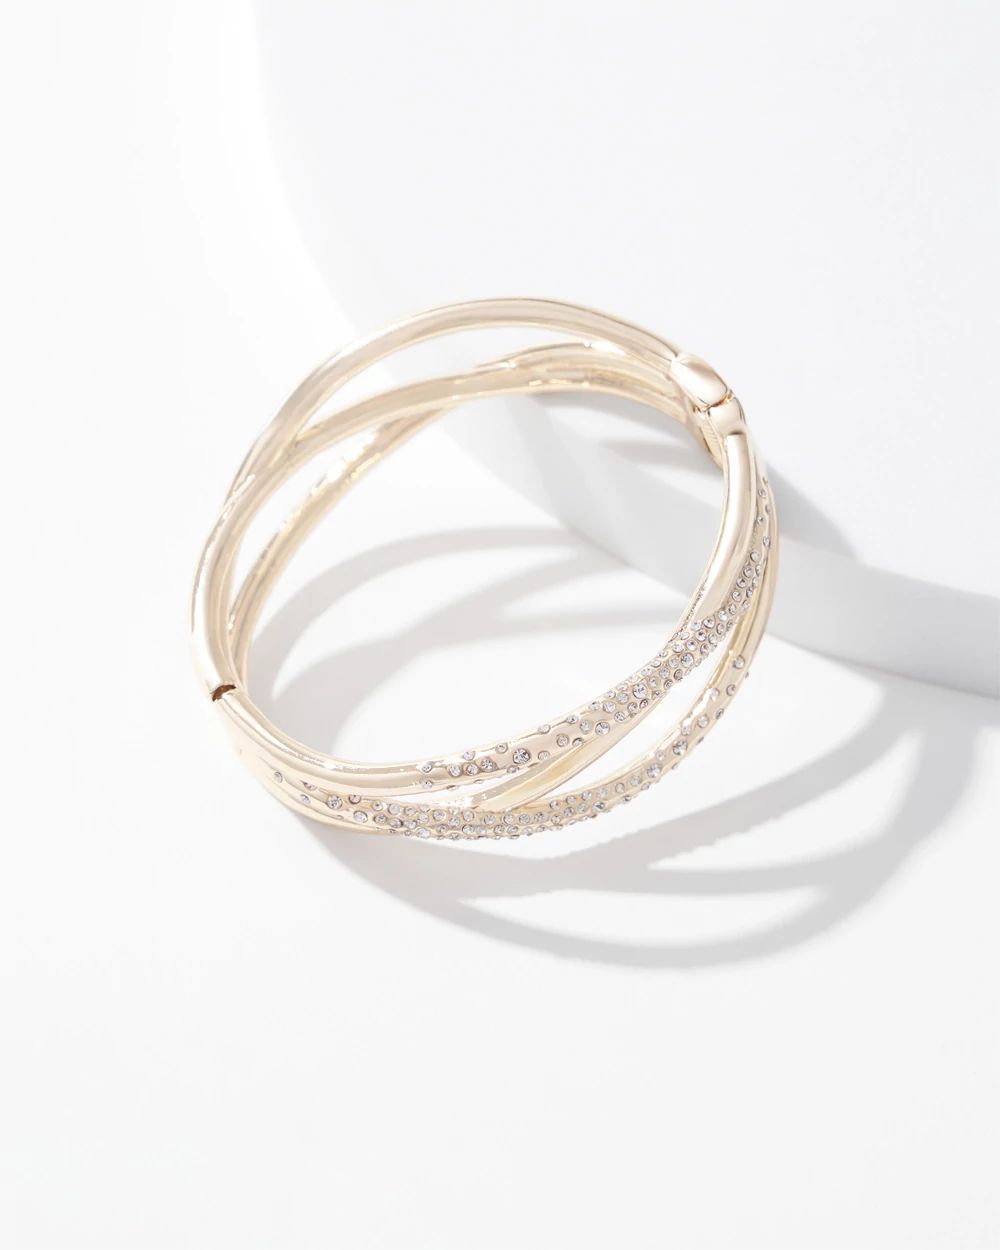 Gold Dusted Pave Cuff Bracelet